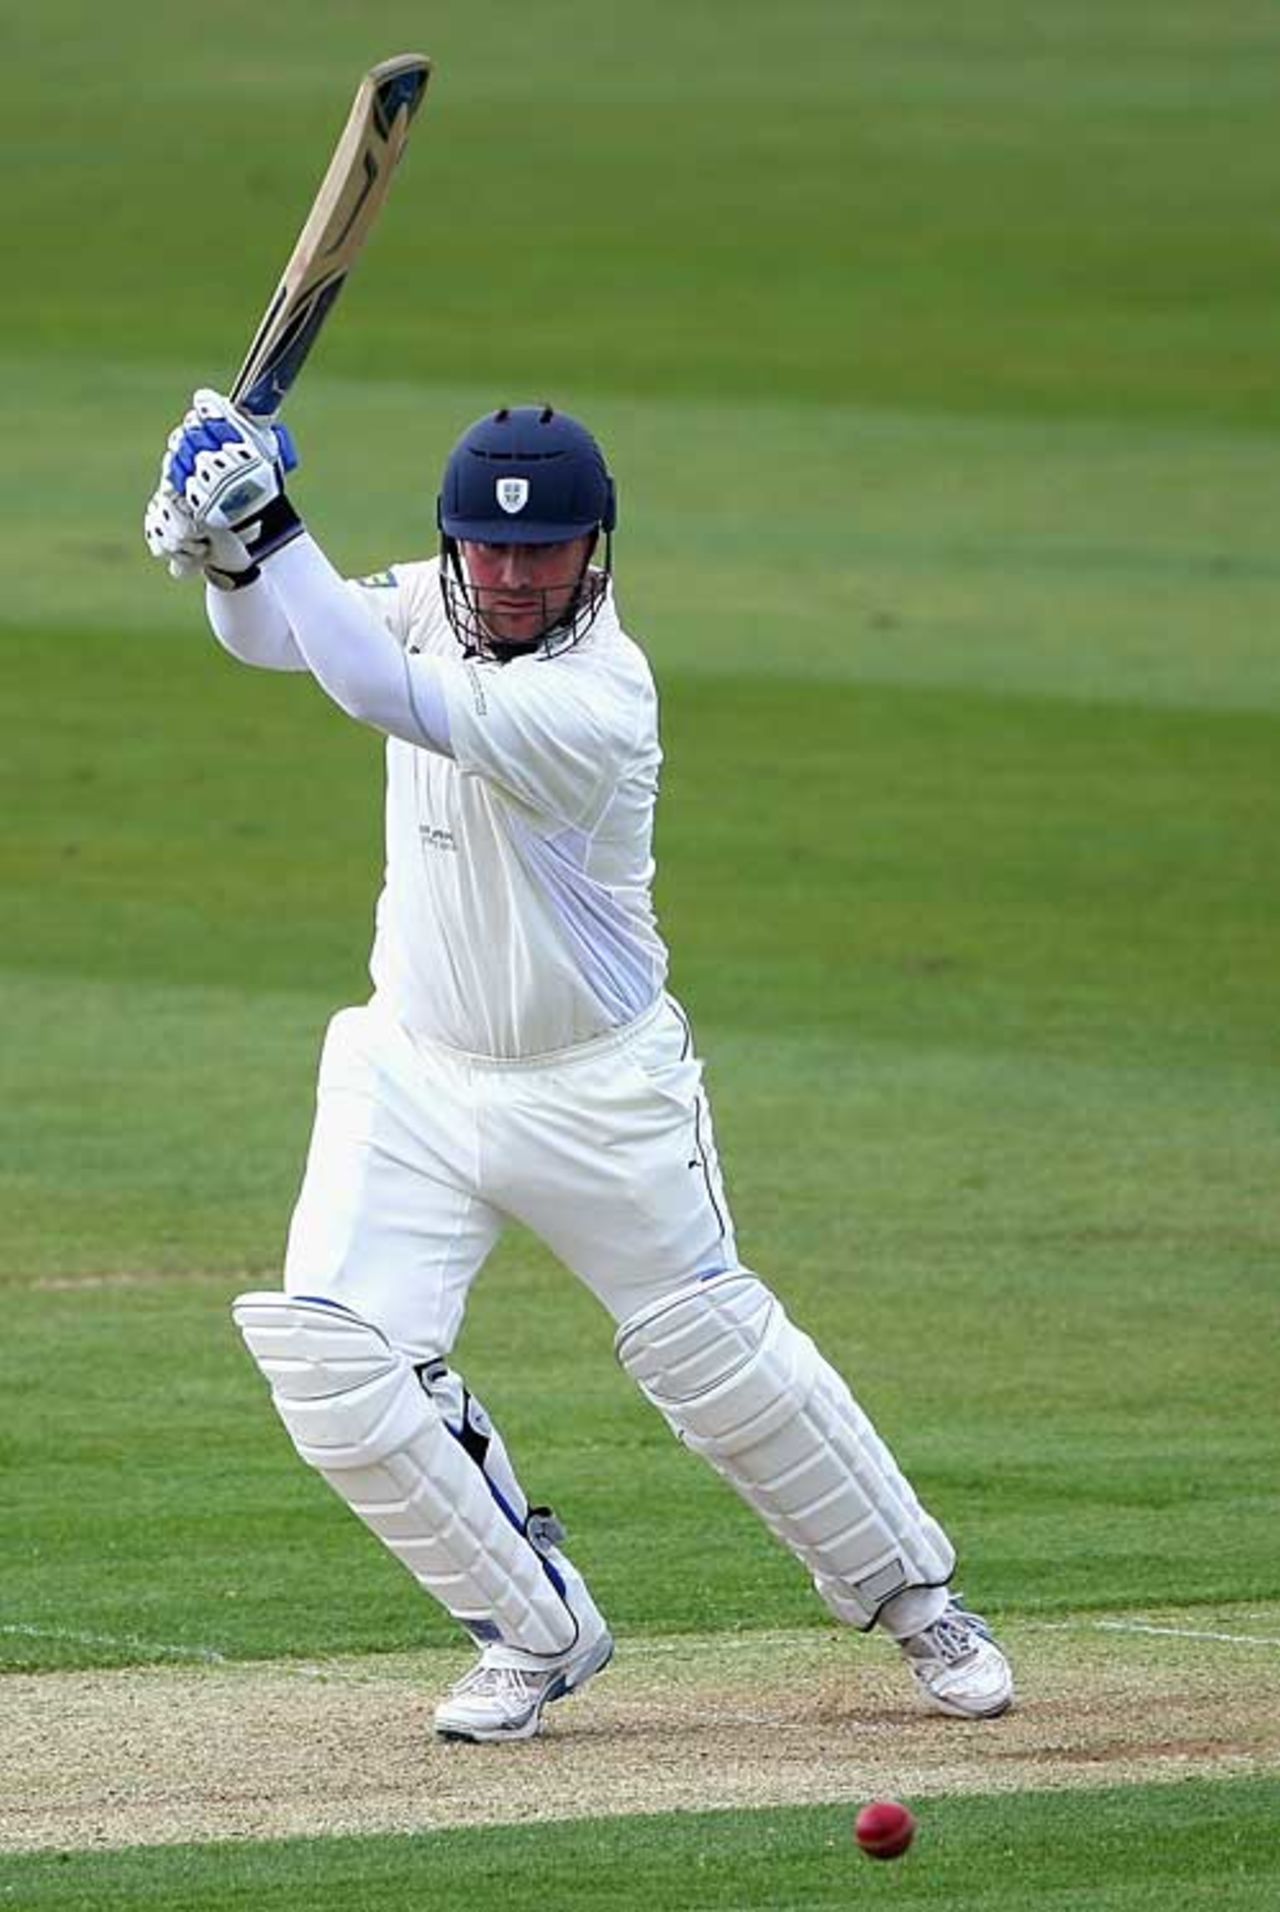 Ian Blackwell helped Durham recover from top-order problems, Durham v Yorkshire, County Championship Division One, Chester-le-Street, April 22, 2009